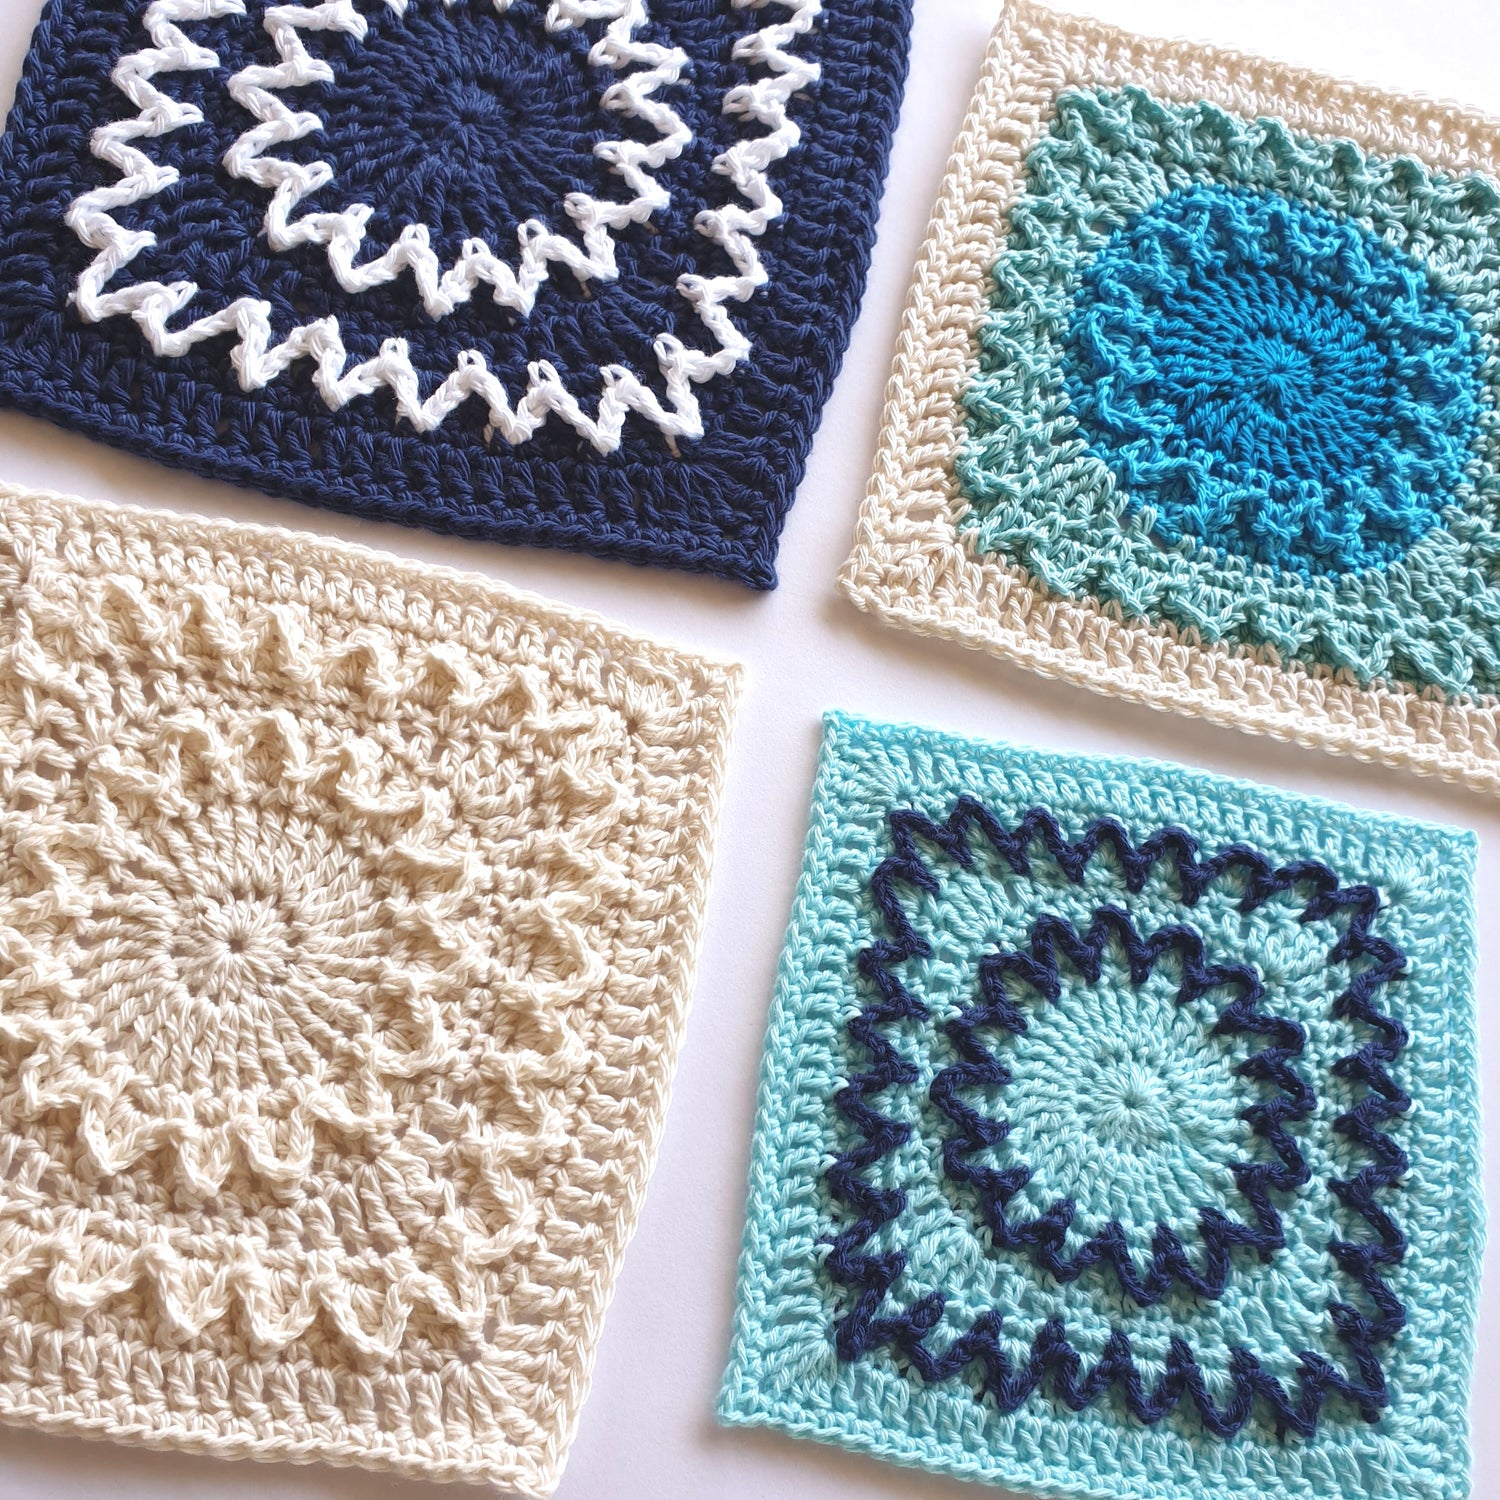 Shine with Hope Granny Squares in different sizes and colours by Shelley Husband